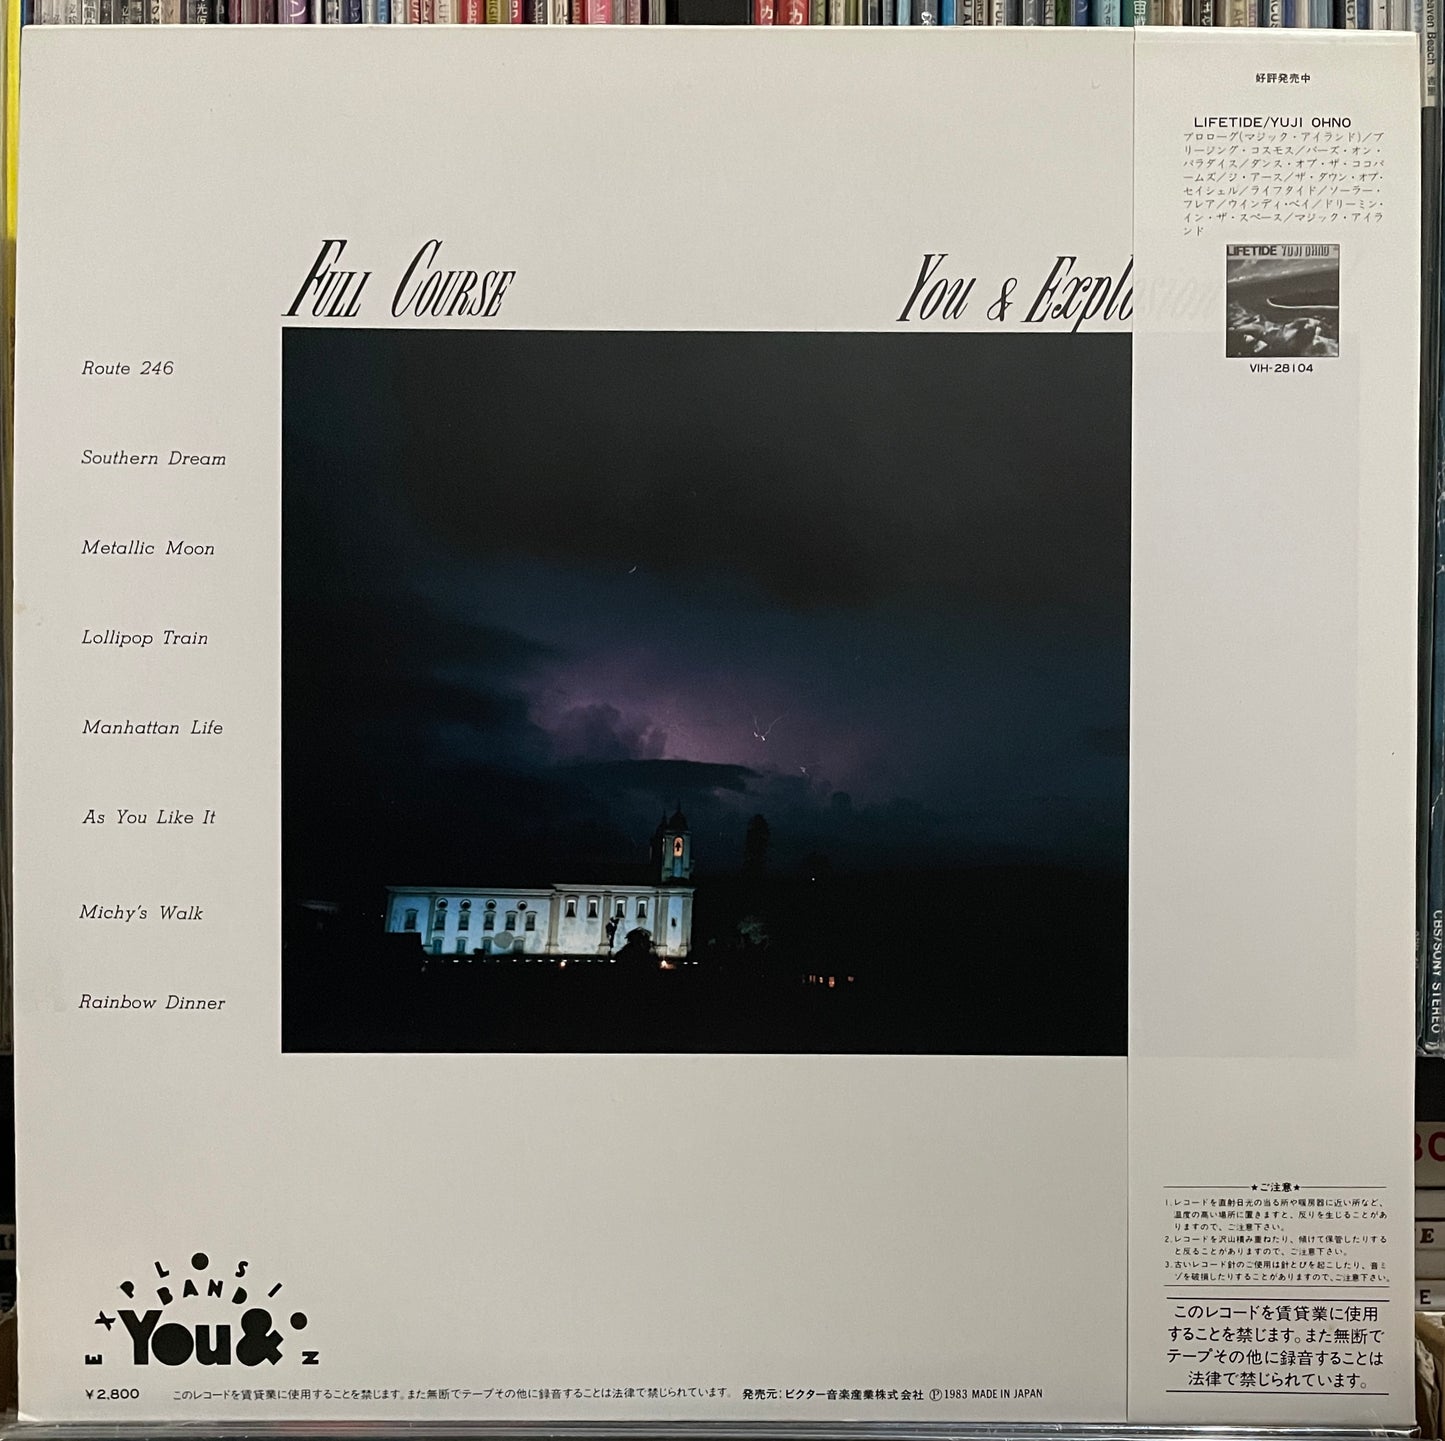 Yuji Ohno (You & The Explosion Band) “Full Course” (1983)